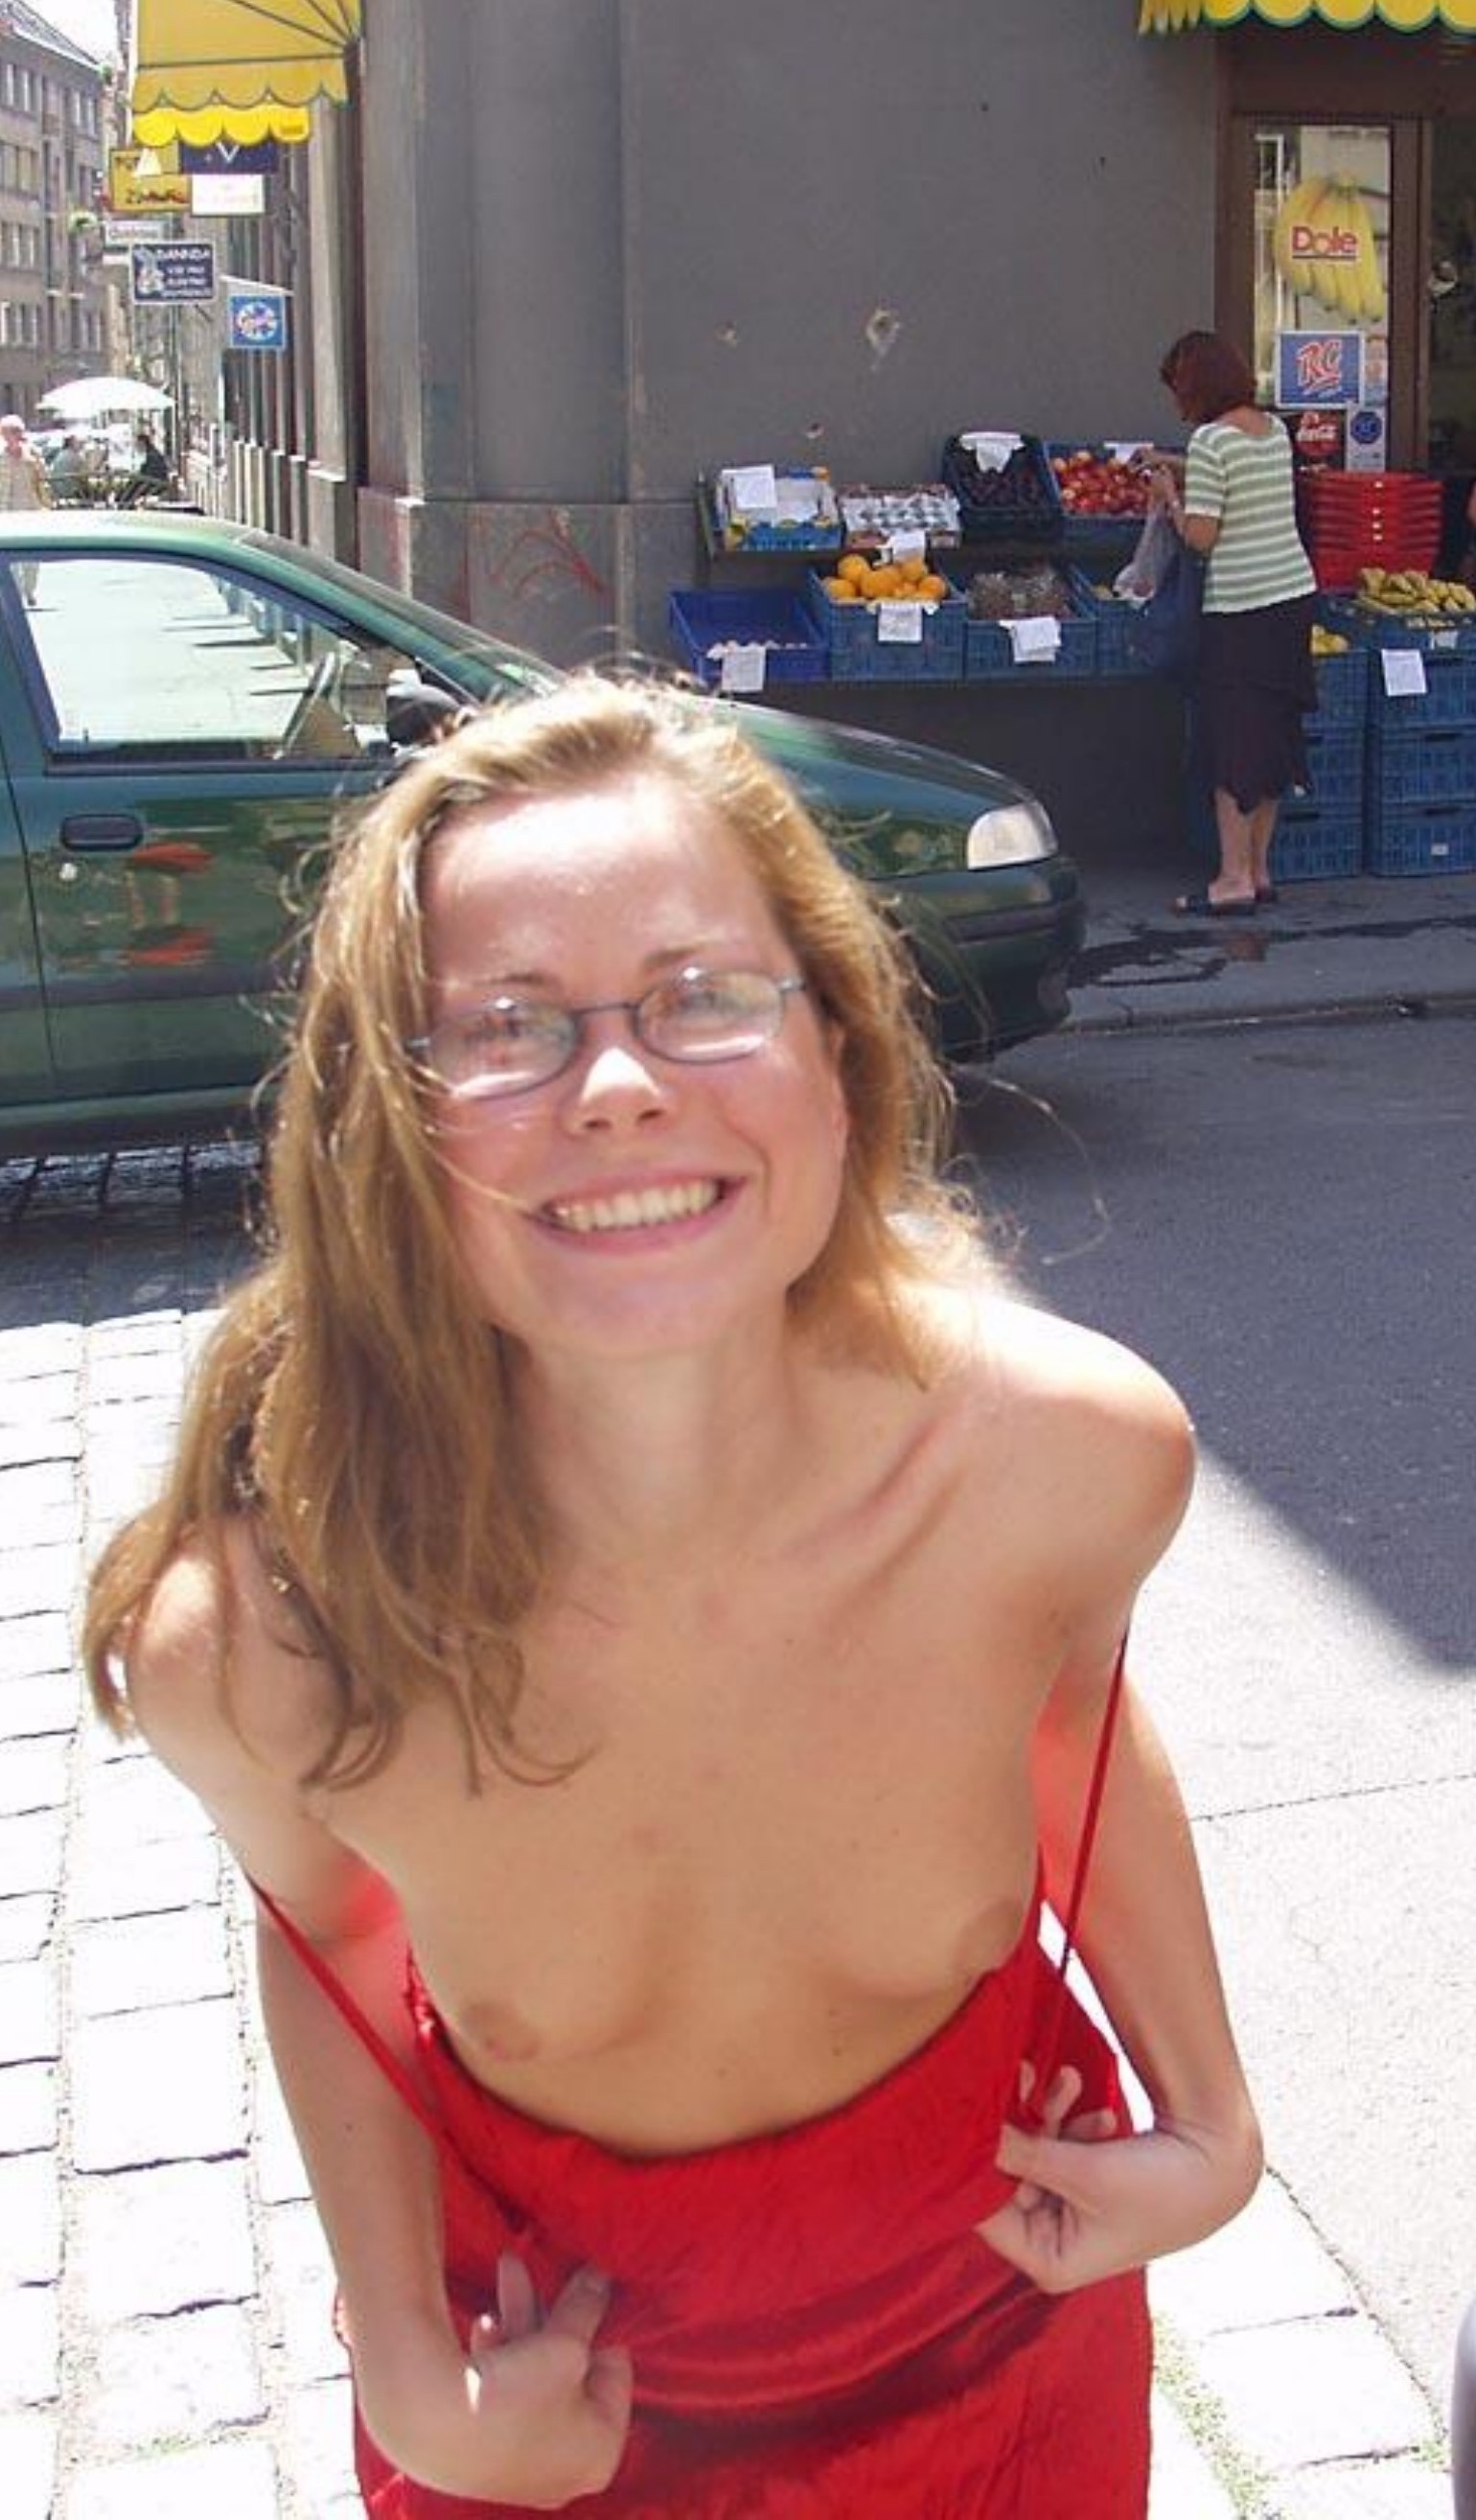 free online dating in columbus ohio #bookworm #flashpussy #glasses #nerd #outdoors #reading #toppulleddown